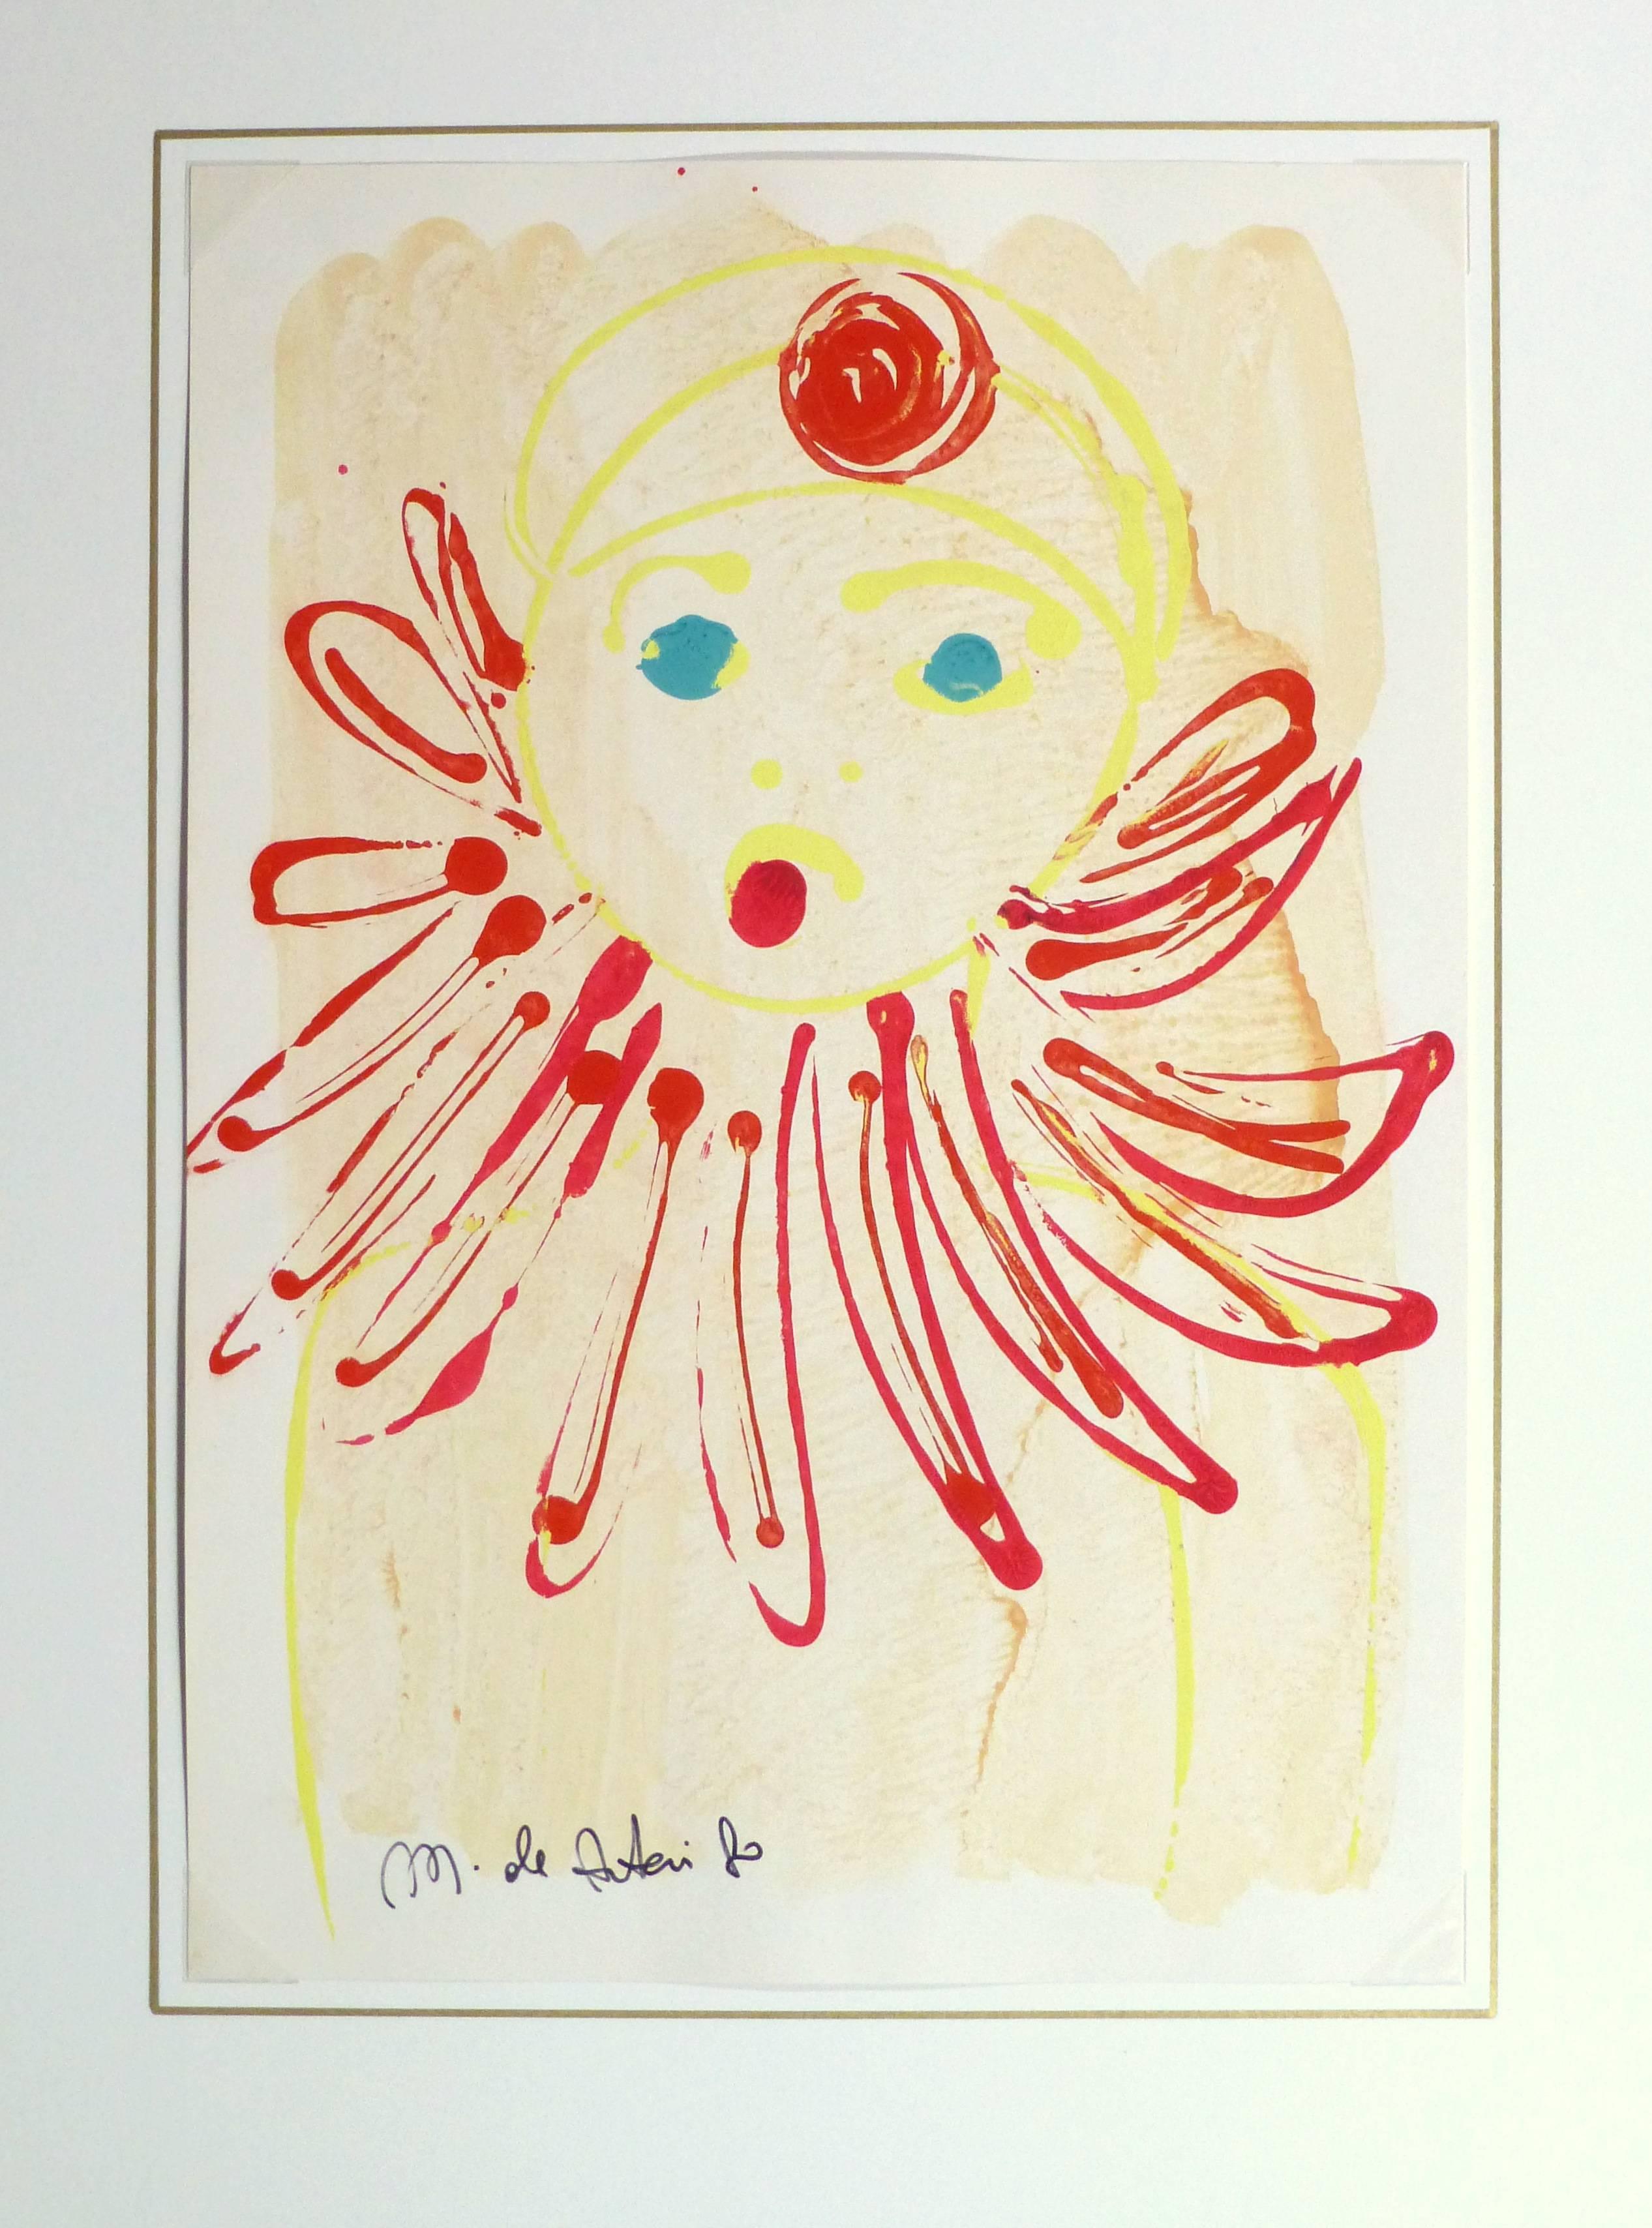 Vividly hued abstract painting of a clown by French artist M. de Anteri, 1980. Signed lower left. 

Original artwork on paper displayed on a white mat with a gold border. Archival plastic sleeve and Certificate of Authenticity included. Artwork,